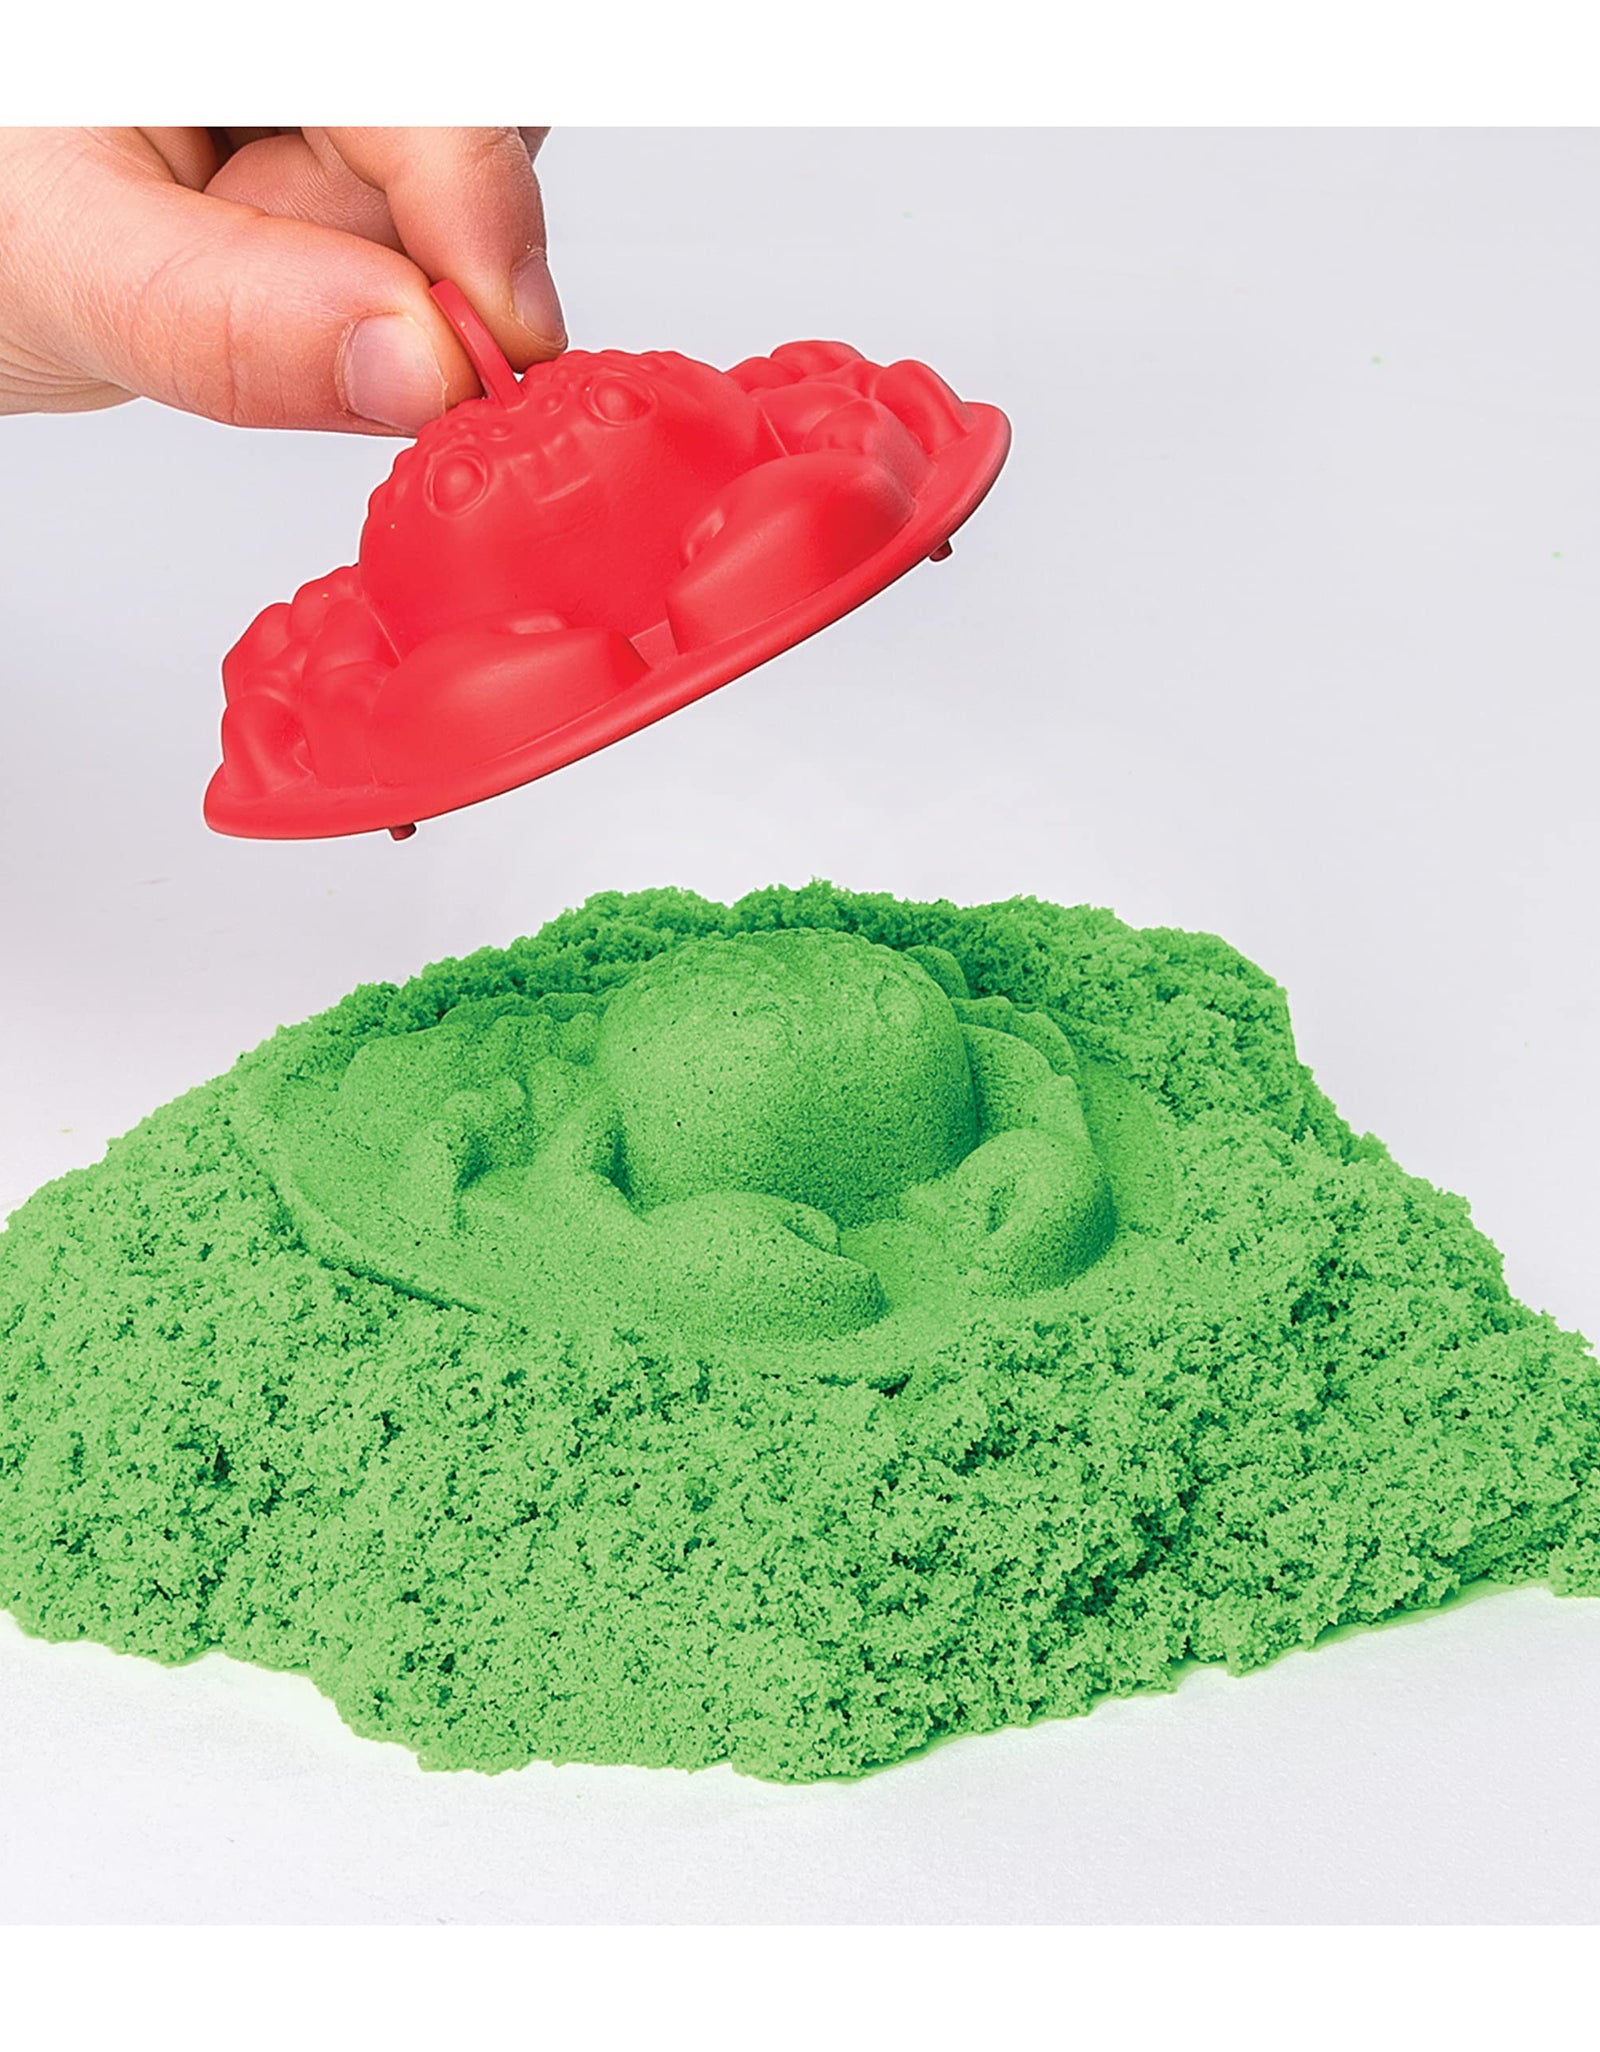 Kinetic Sand, Sandbox Playset with 1lb of Green and 3 Molds, for Ages 3 and up